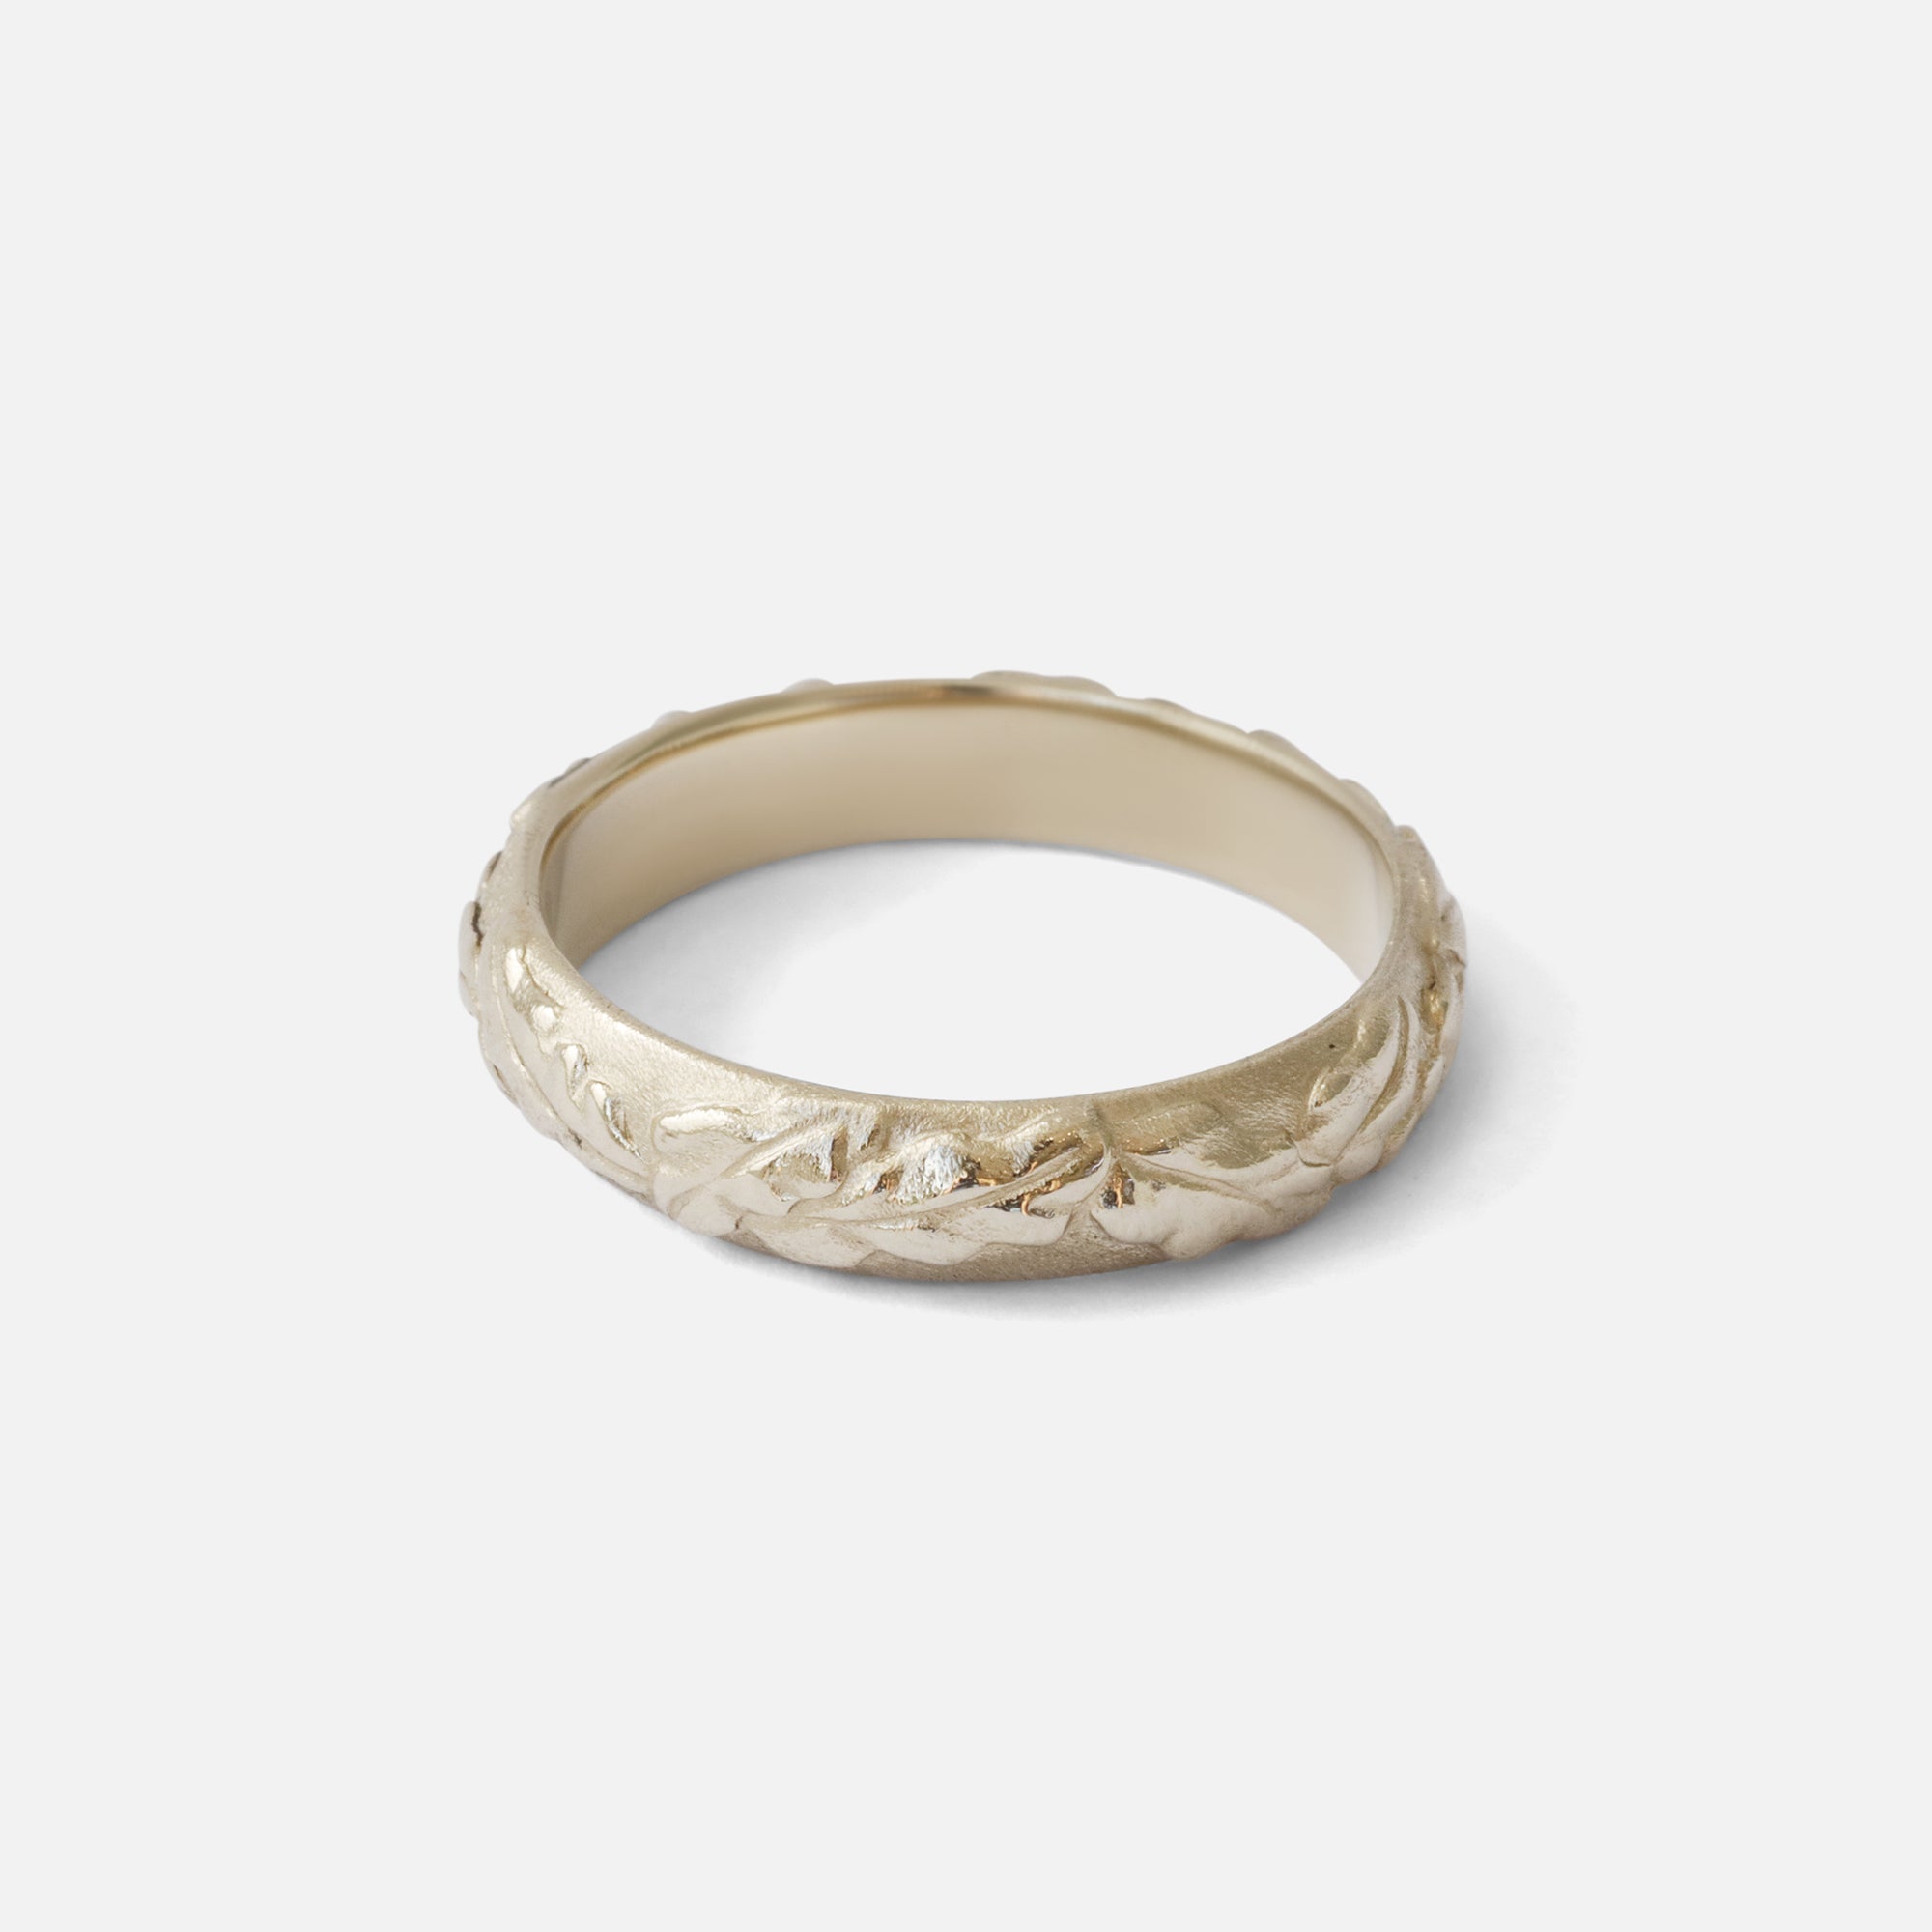 Oak Band By O Channell Designs in Wedding Bands Category